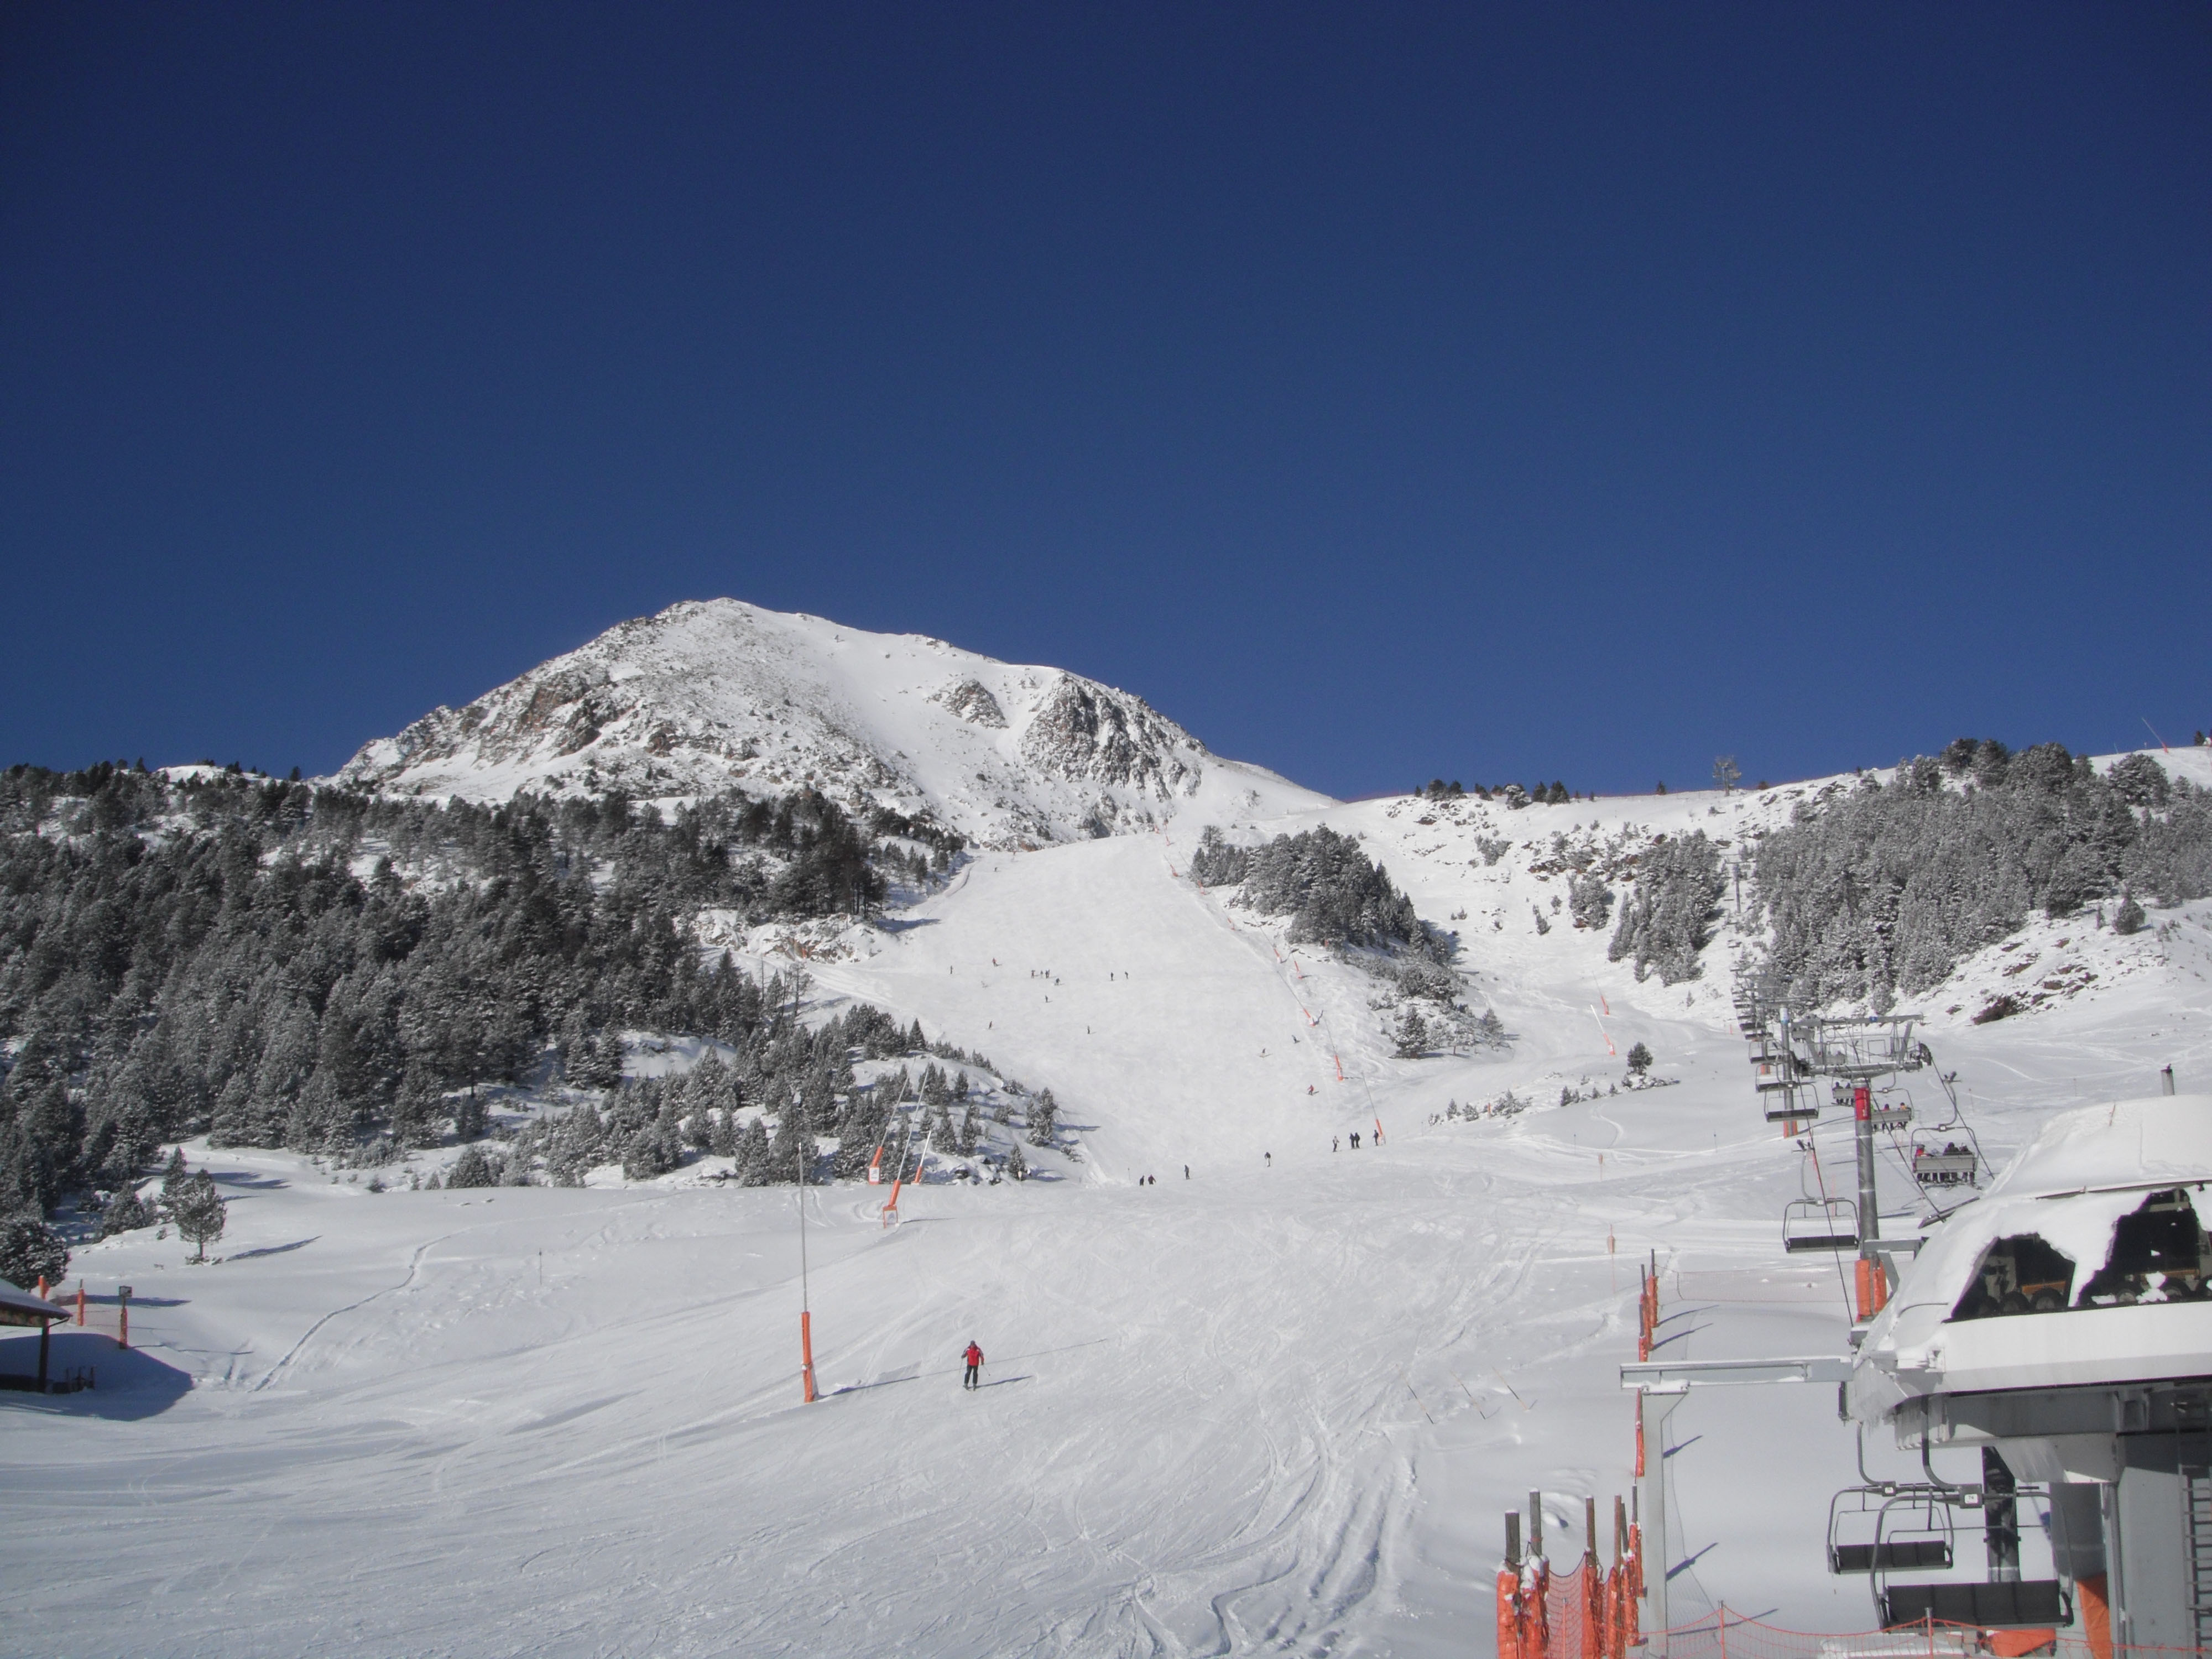 Looking up the slopes - 30/01/2012